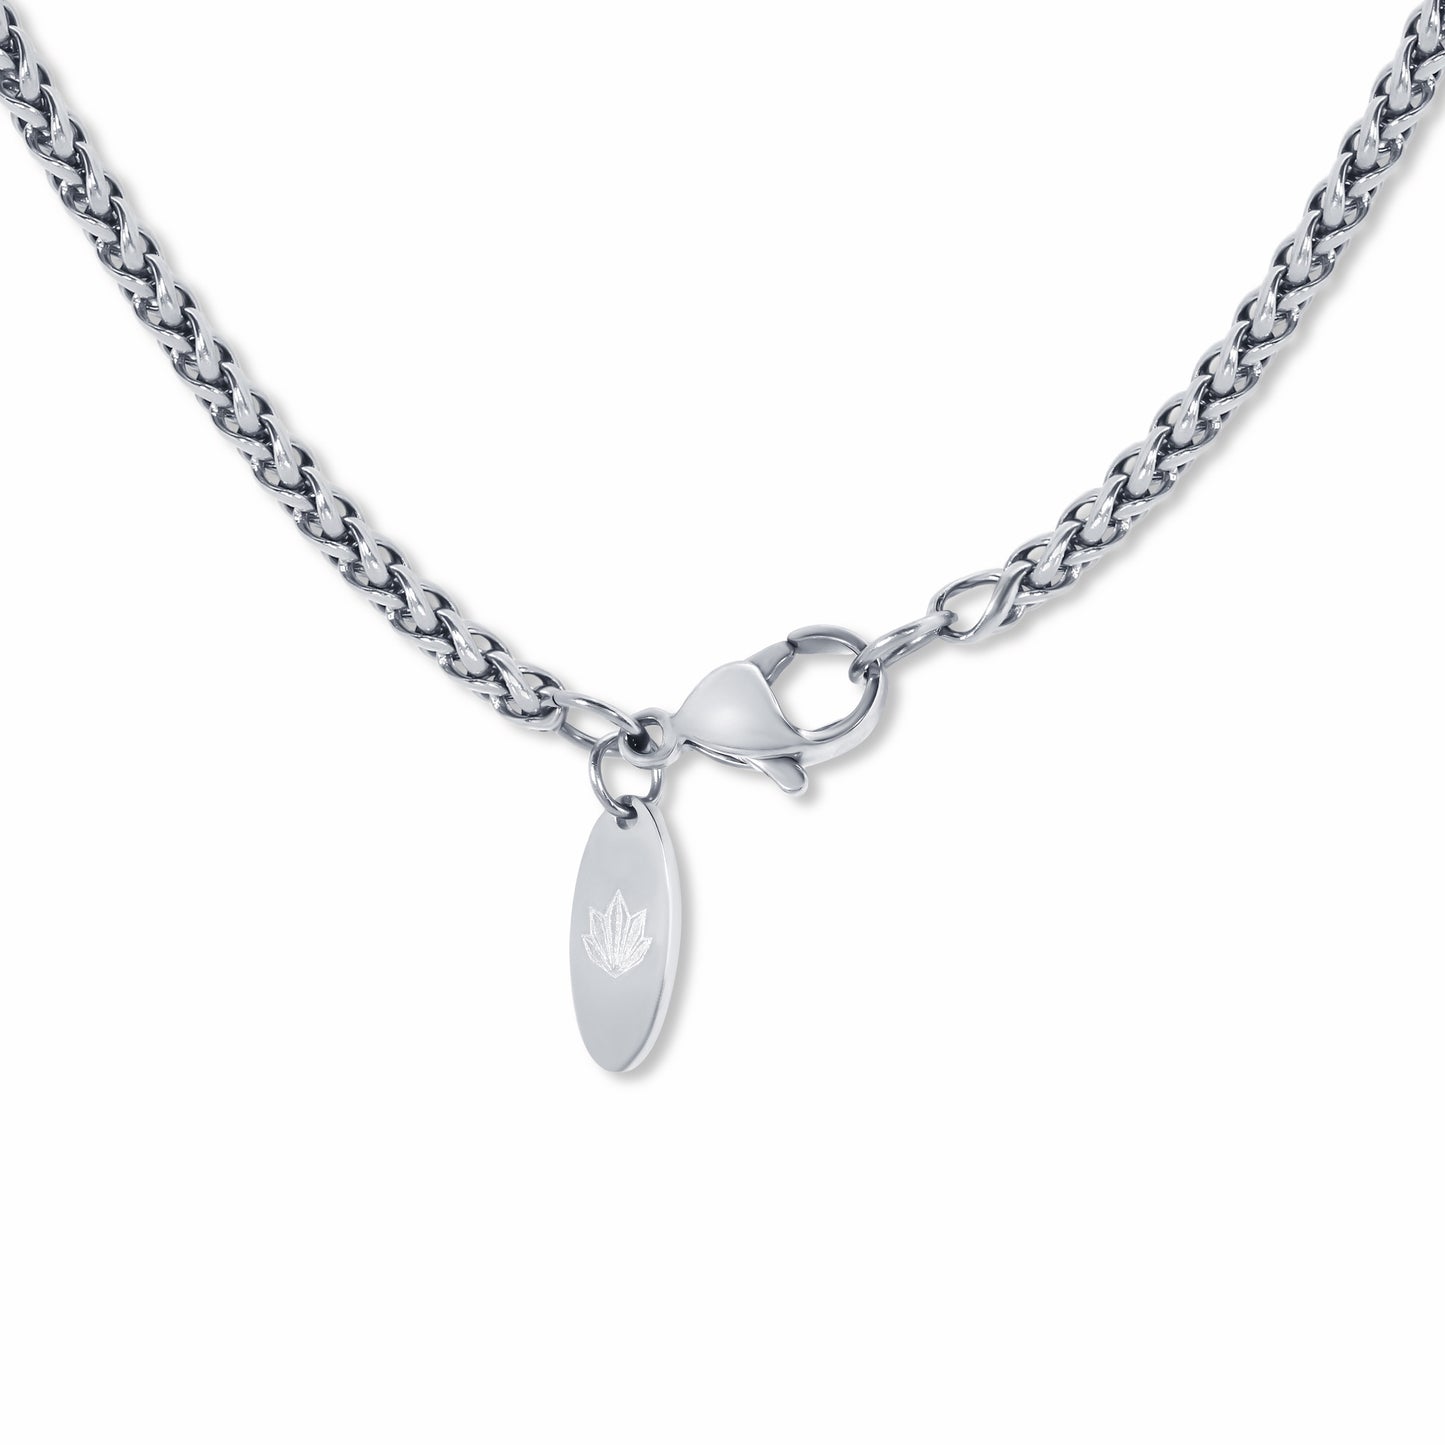 Spiga Chain Silver 3mm clasp with engraved logo tag on a white background